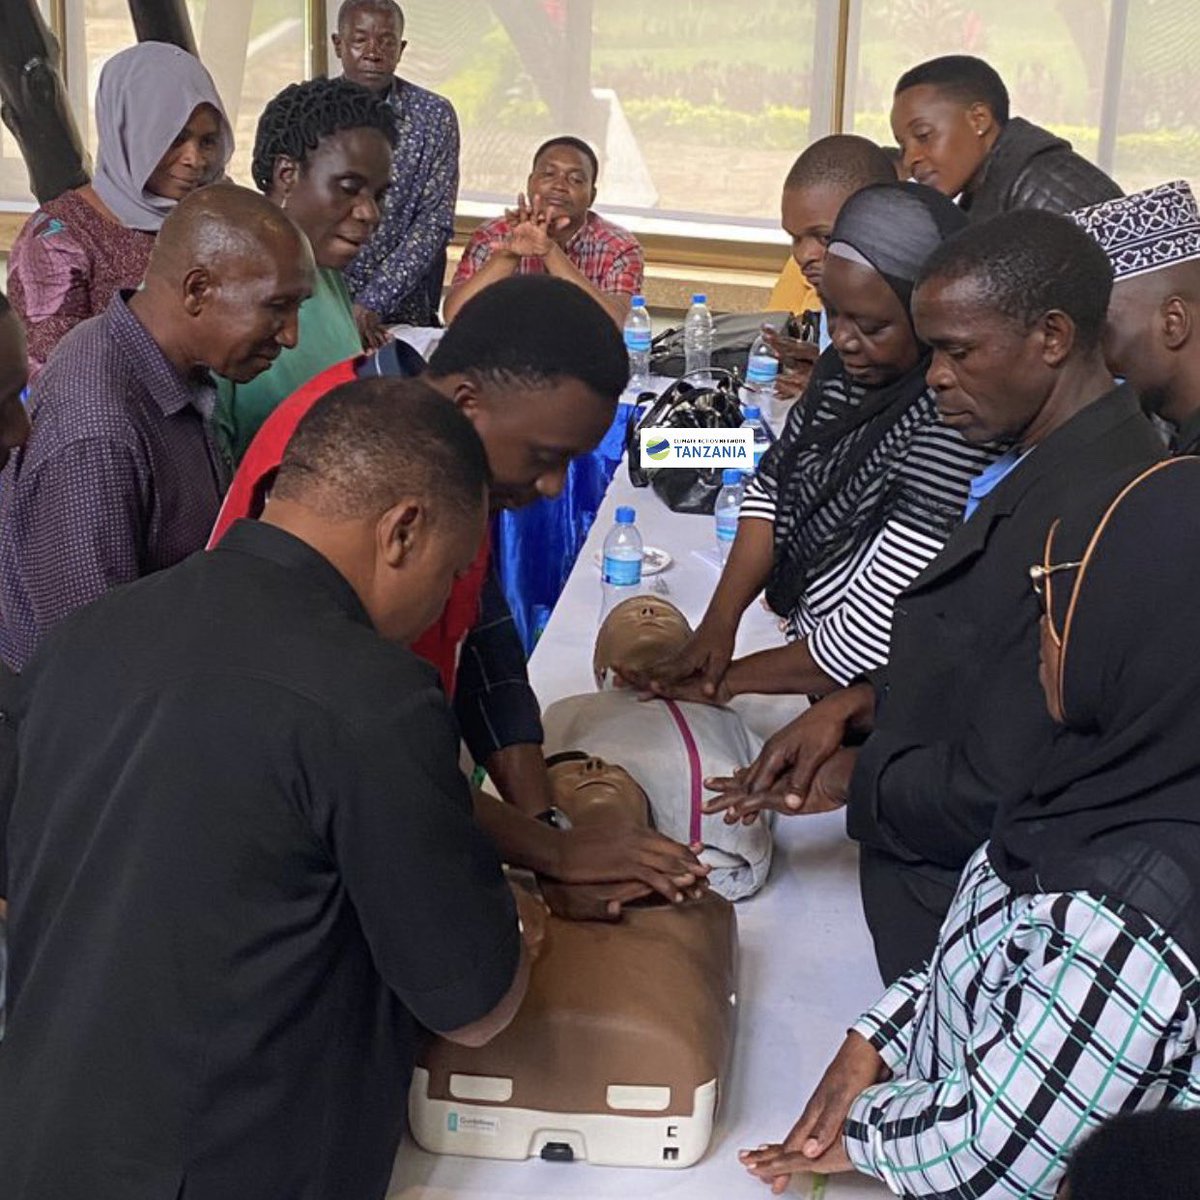 Today afternoon, #Morogoro Wards' Disaster teams were trained by Red Cross Tanzania on #EarlyResponse, first aid & healthcare in disasters. Thanks to @trcs1962 Morogoro for equipping & preparing our communities! #DisasterPreparedness #Floods #TanzaniaRedCross